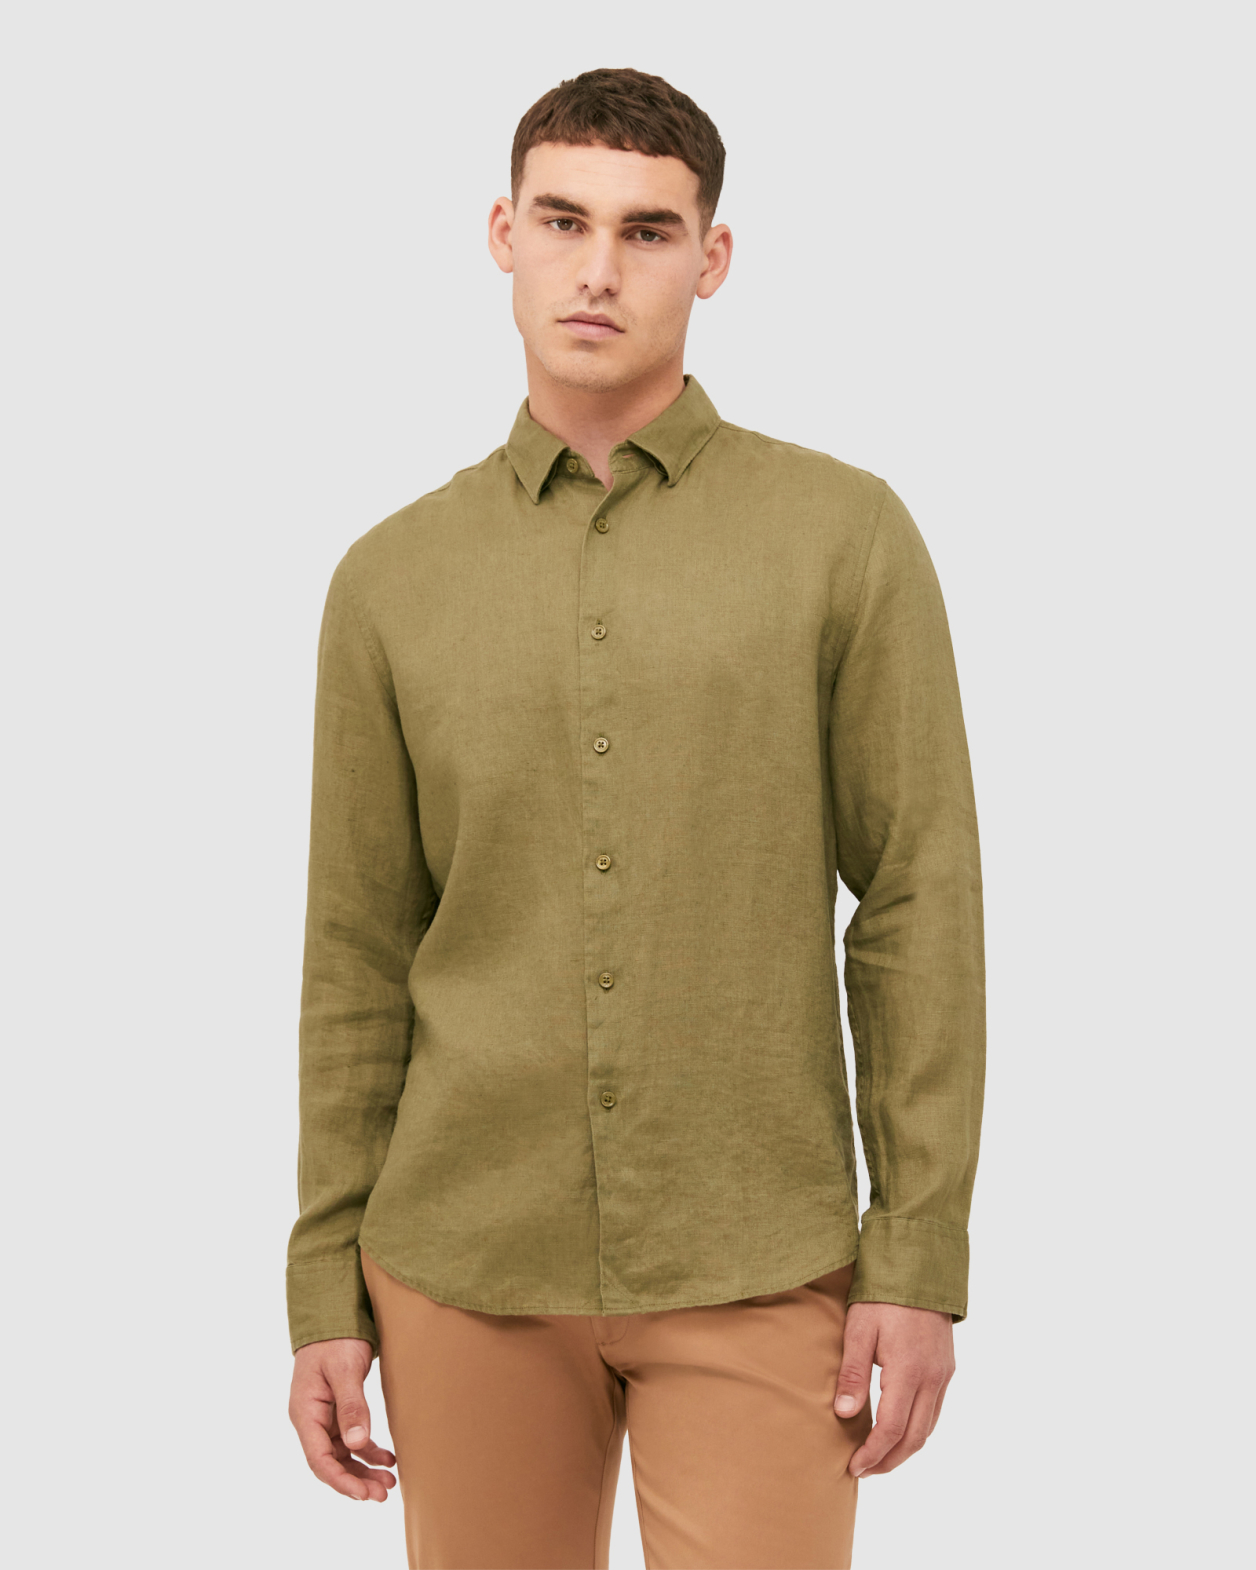 Anderson Long Sleeve Classic Linen Shirt in WASHED OLIVE